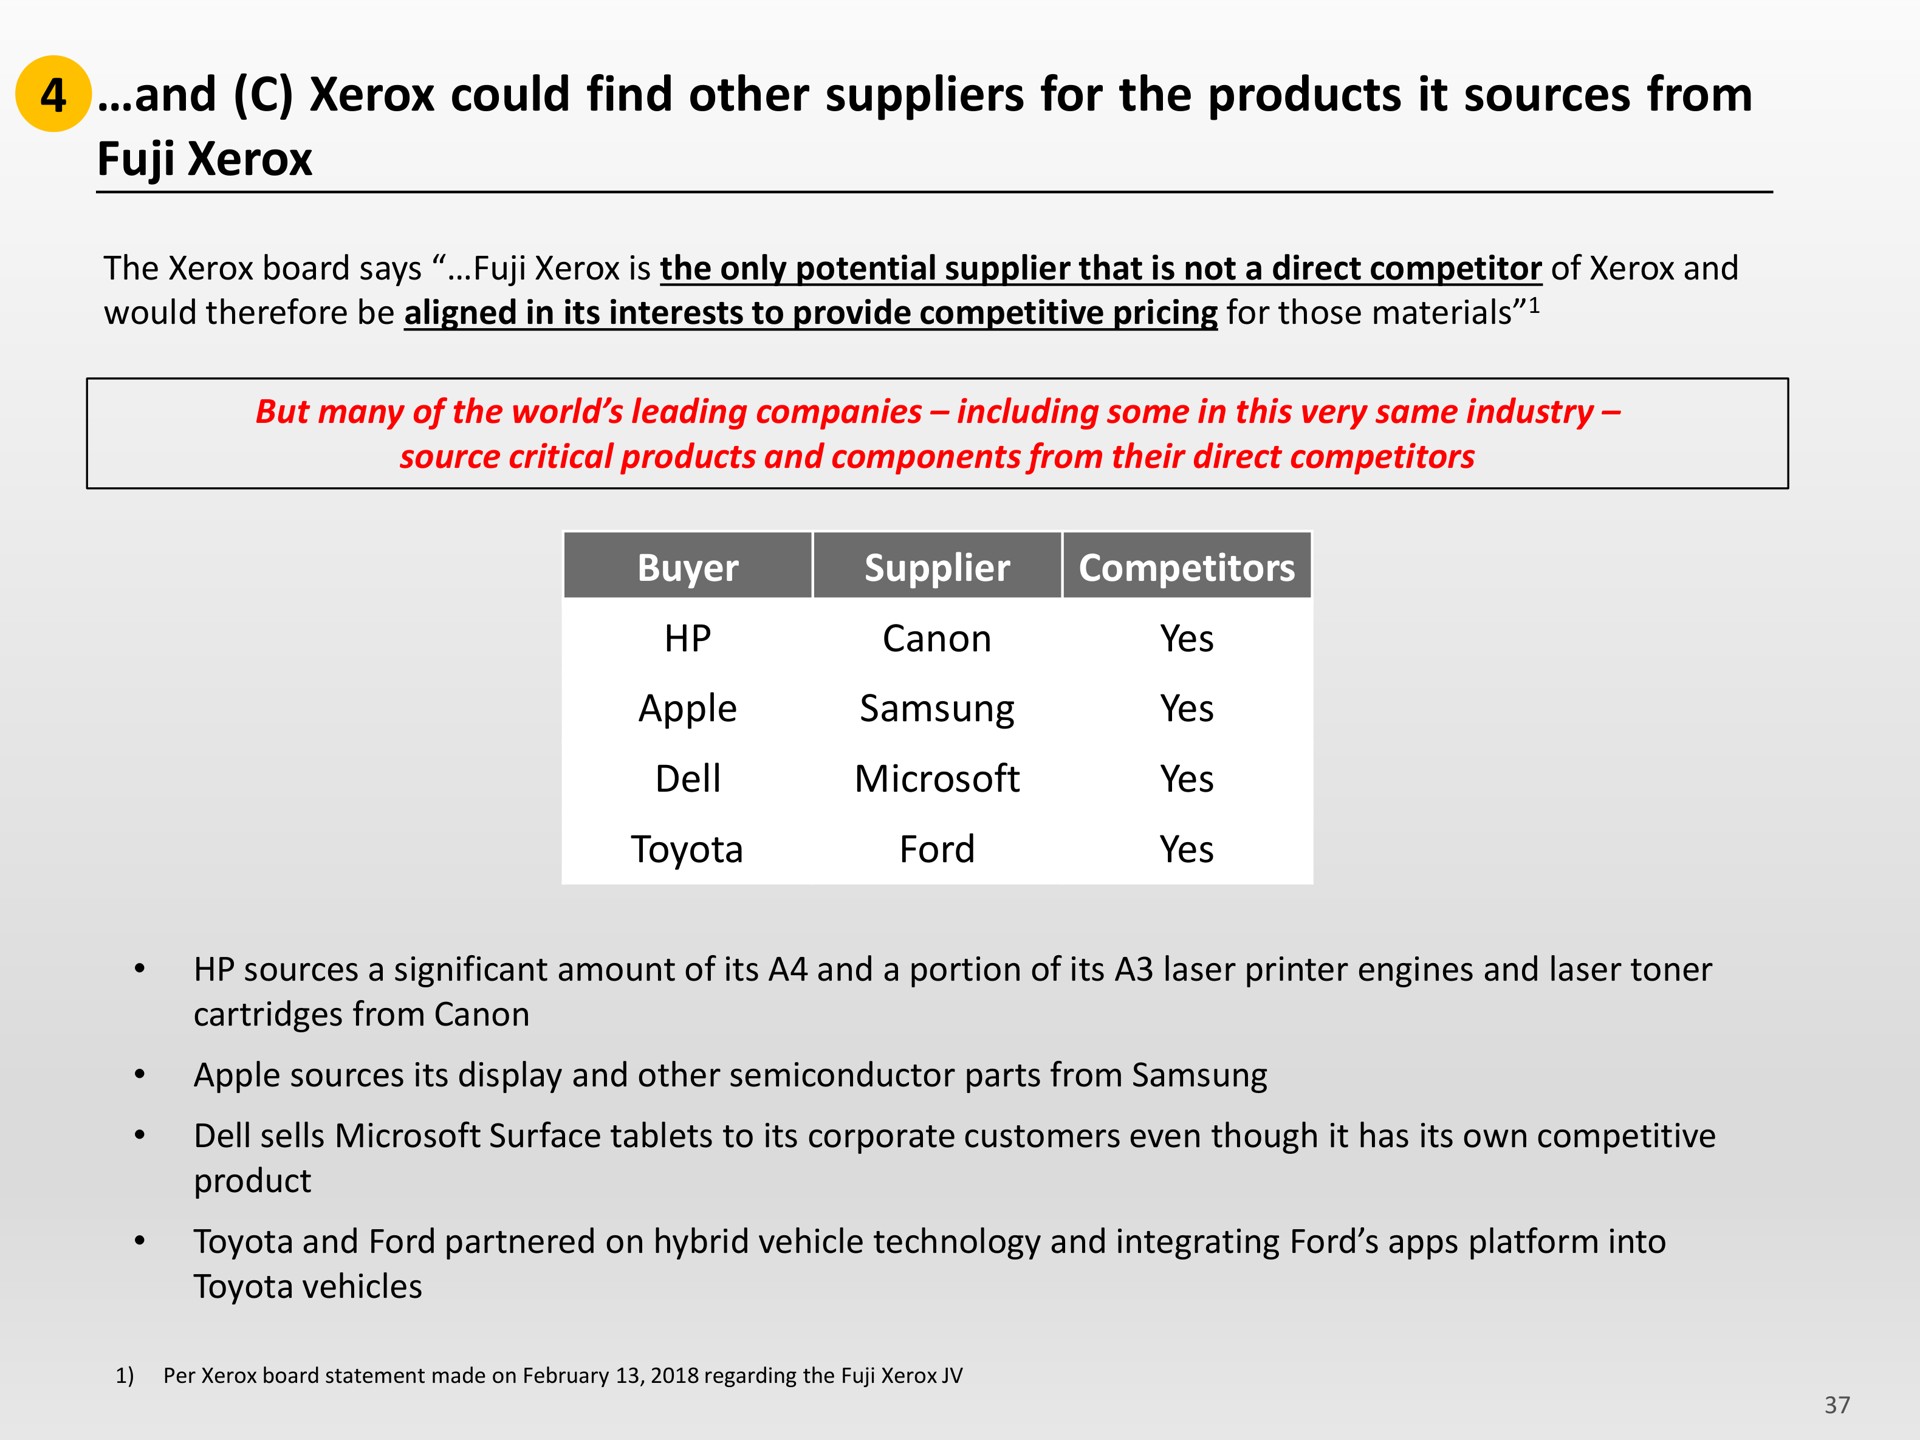 and could find other suppliers for the products it sources from fuji | Icahn Enterprises